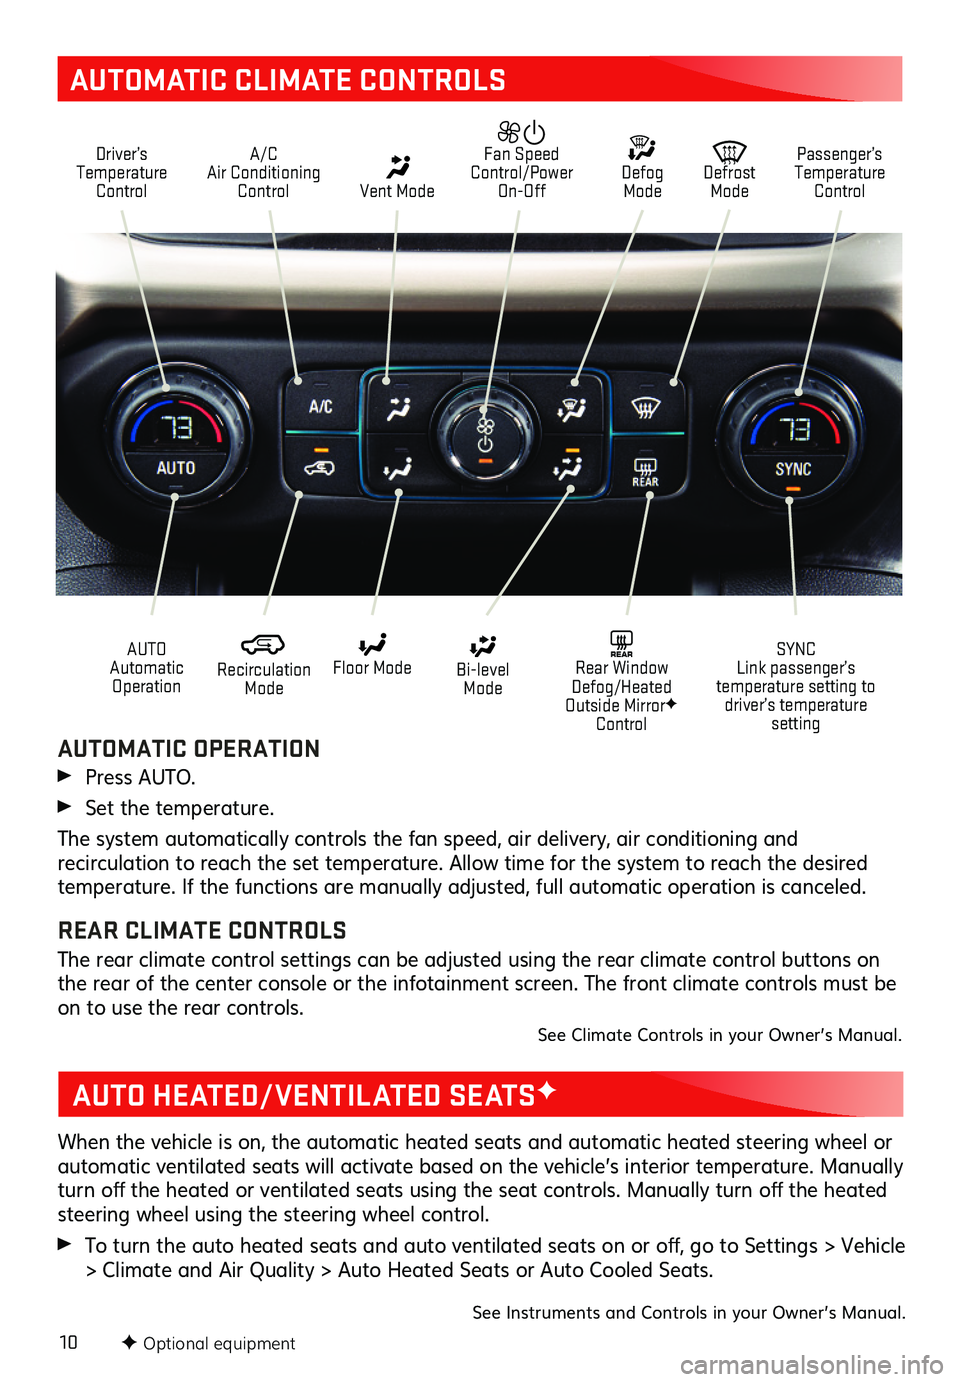 GMC ACADIA 2019  Get To Know Guide 10
AUTOMATIC CLIMATE CONTROLS
Driver’s Temperature Control
A/C Air Conditioning Control Vent Mode
  Defrost Mode
 Defog Mode
Passenger’s Temperature Control
  Fan Speed Control/Power On-Off
 Recir